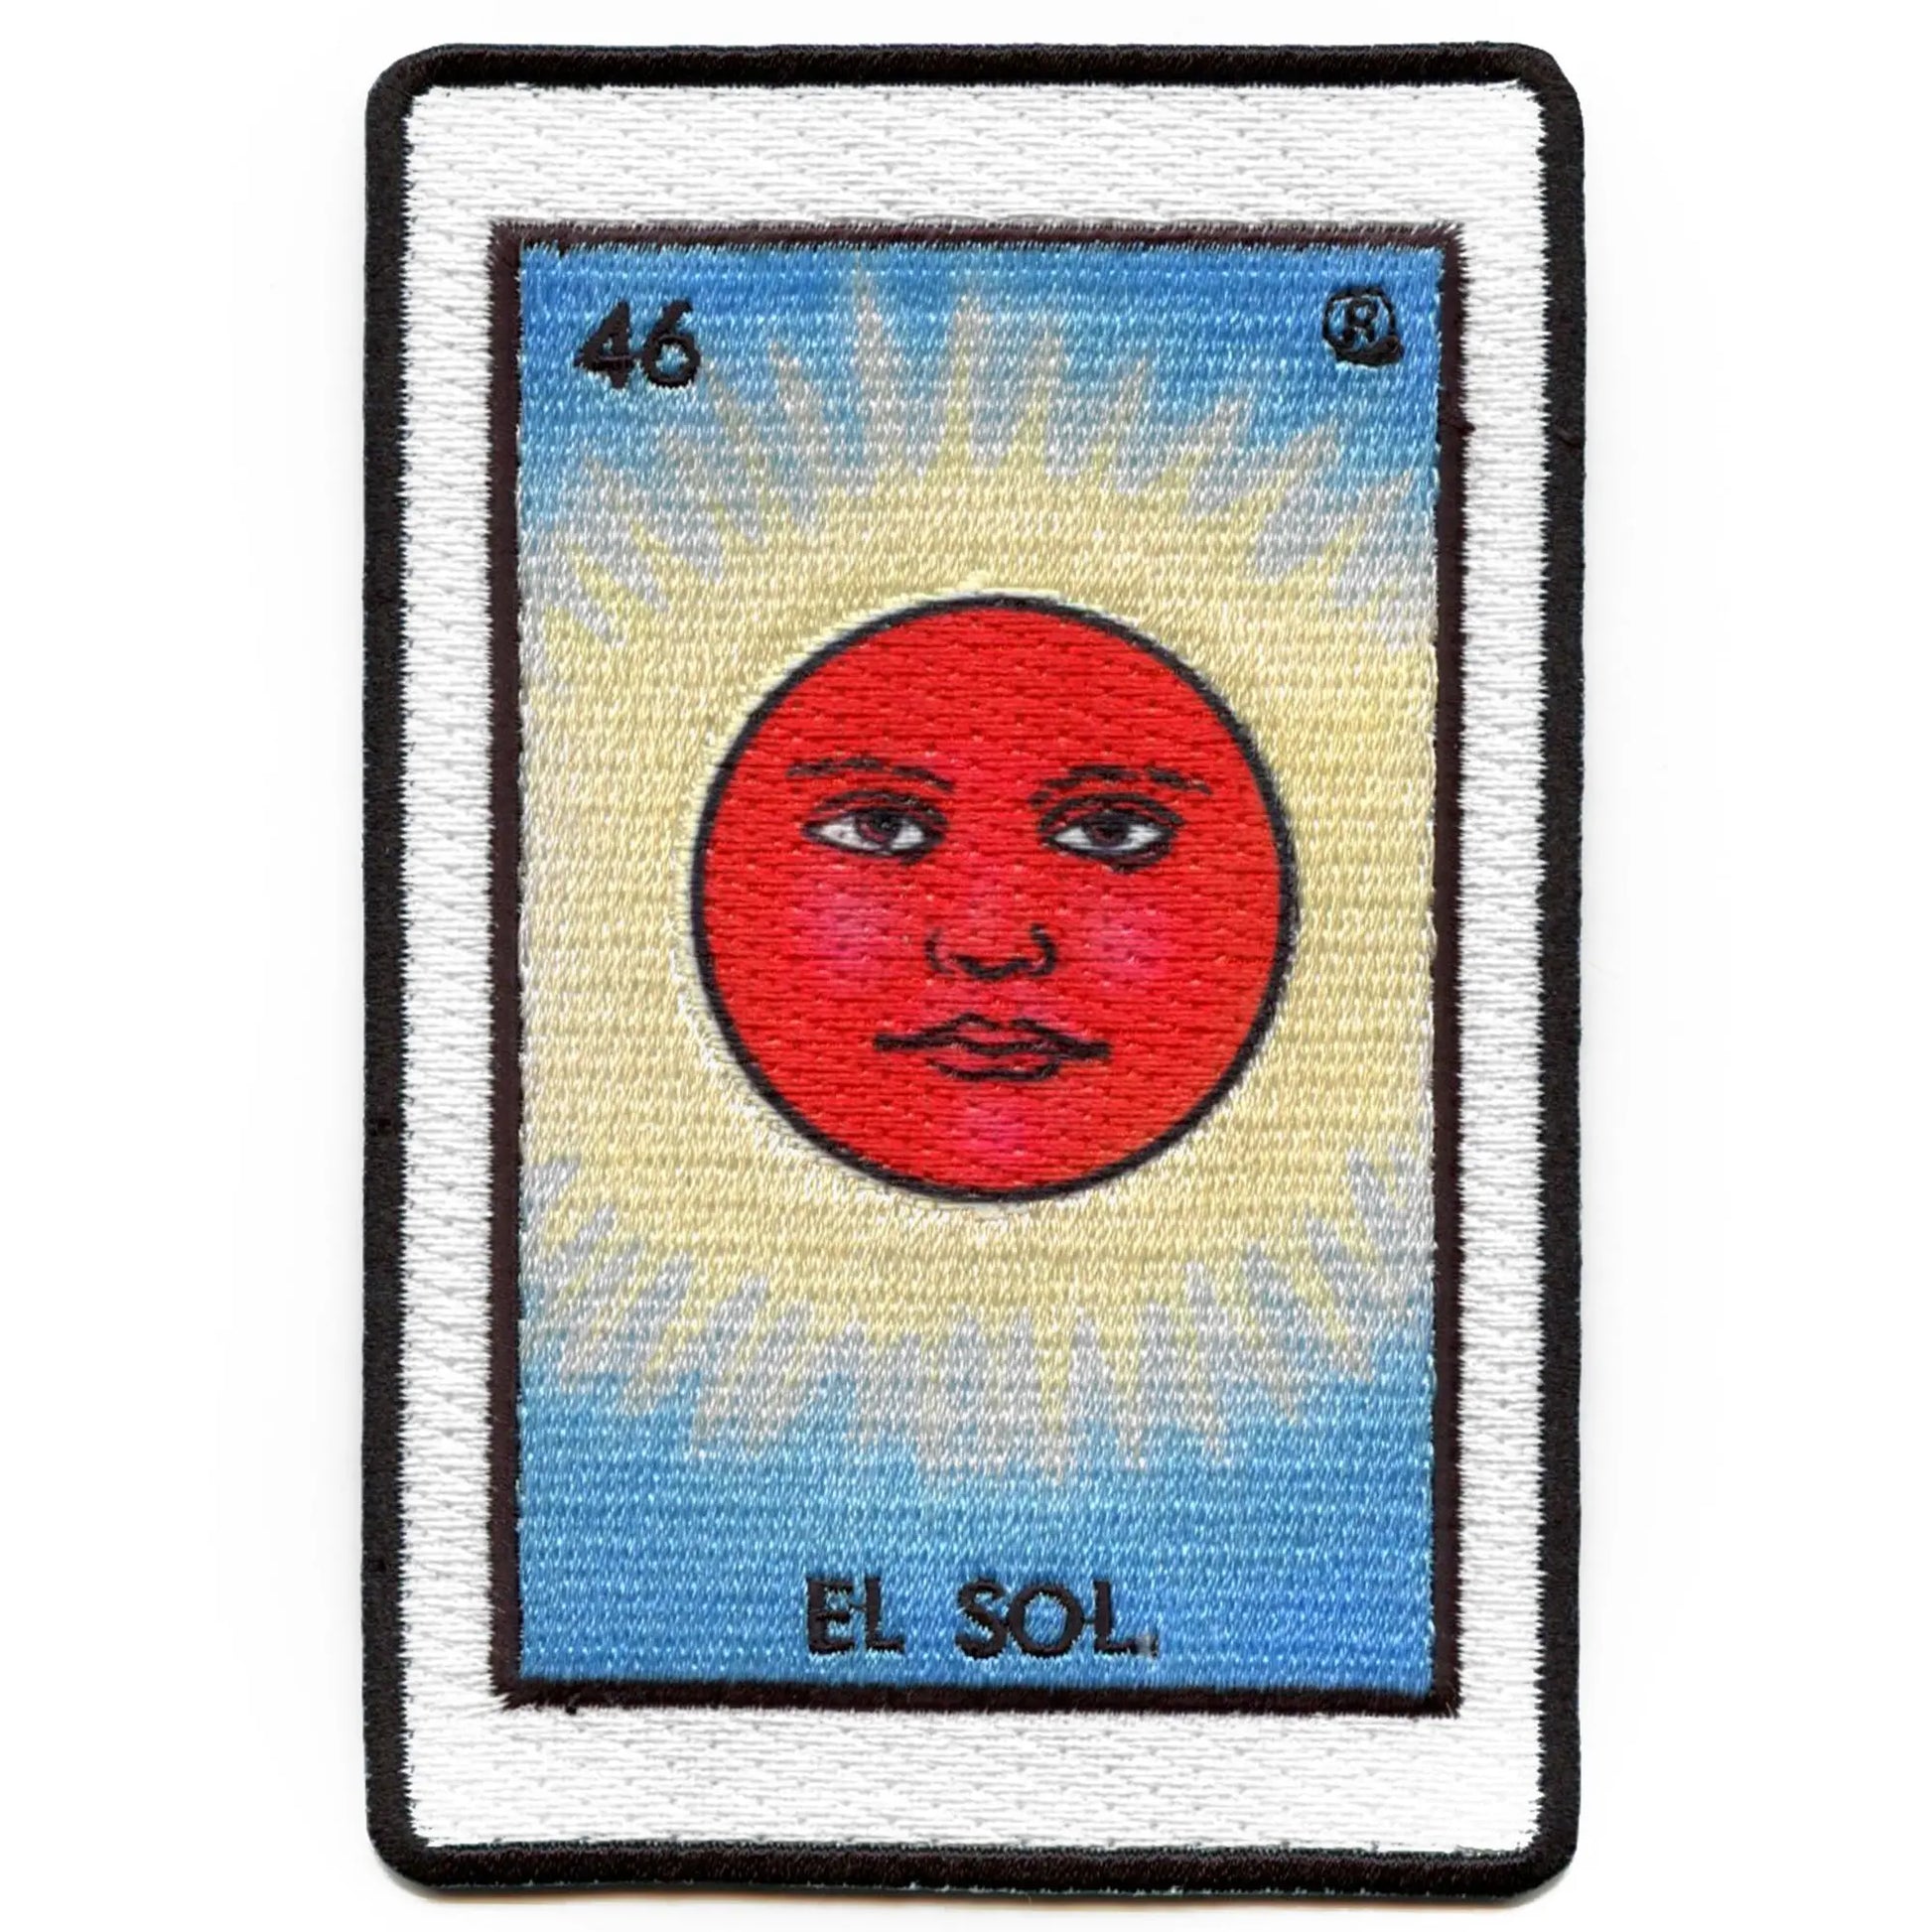 El Sol 46 Patch Mexican Loteria Card Sublimated Embroidery Iron On